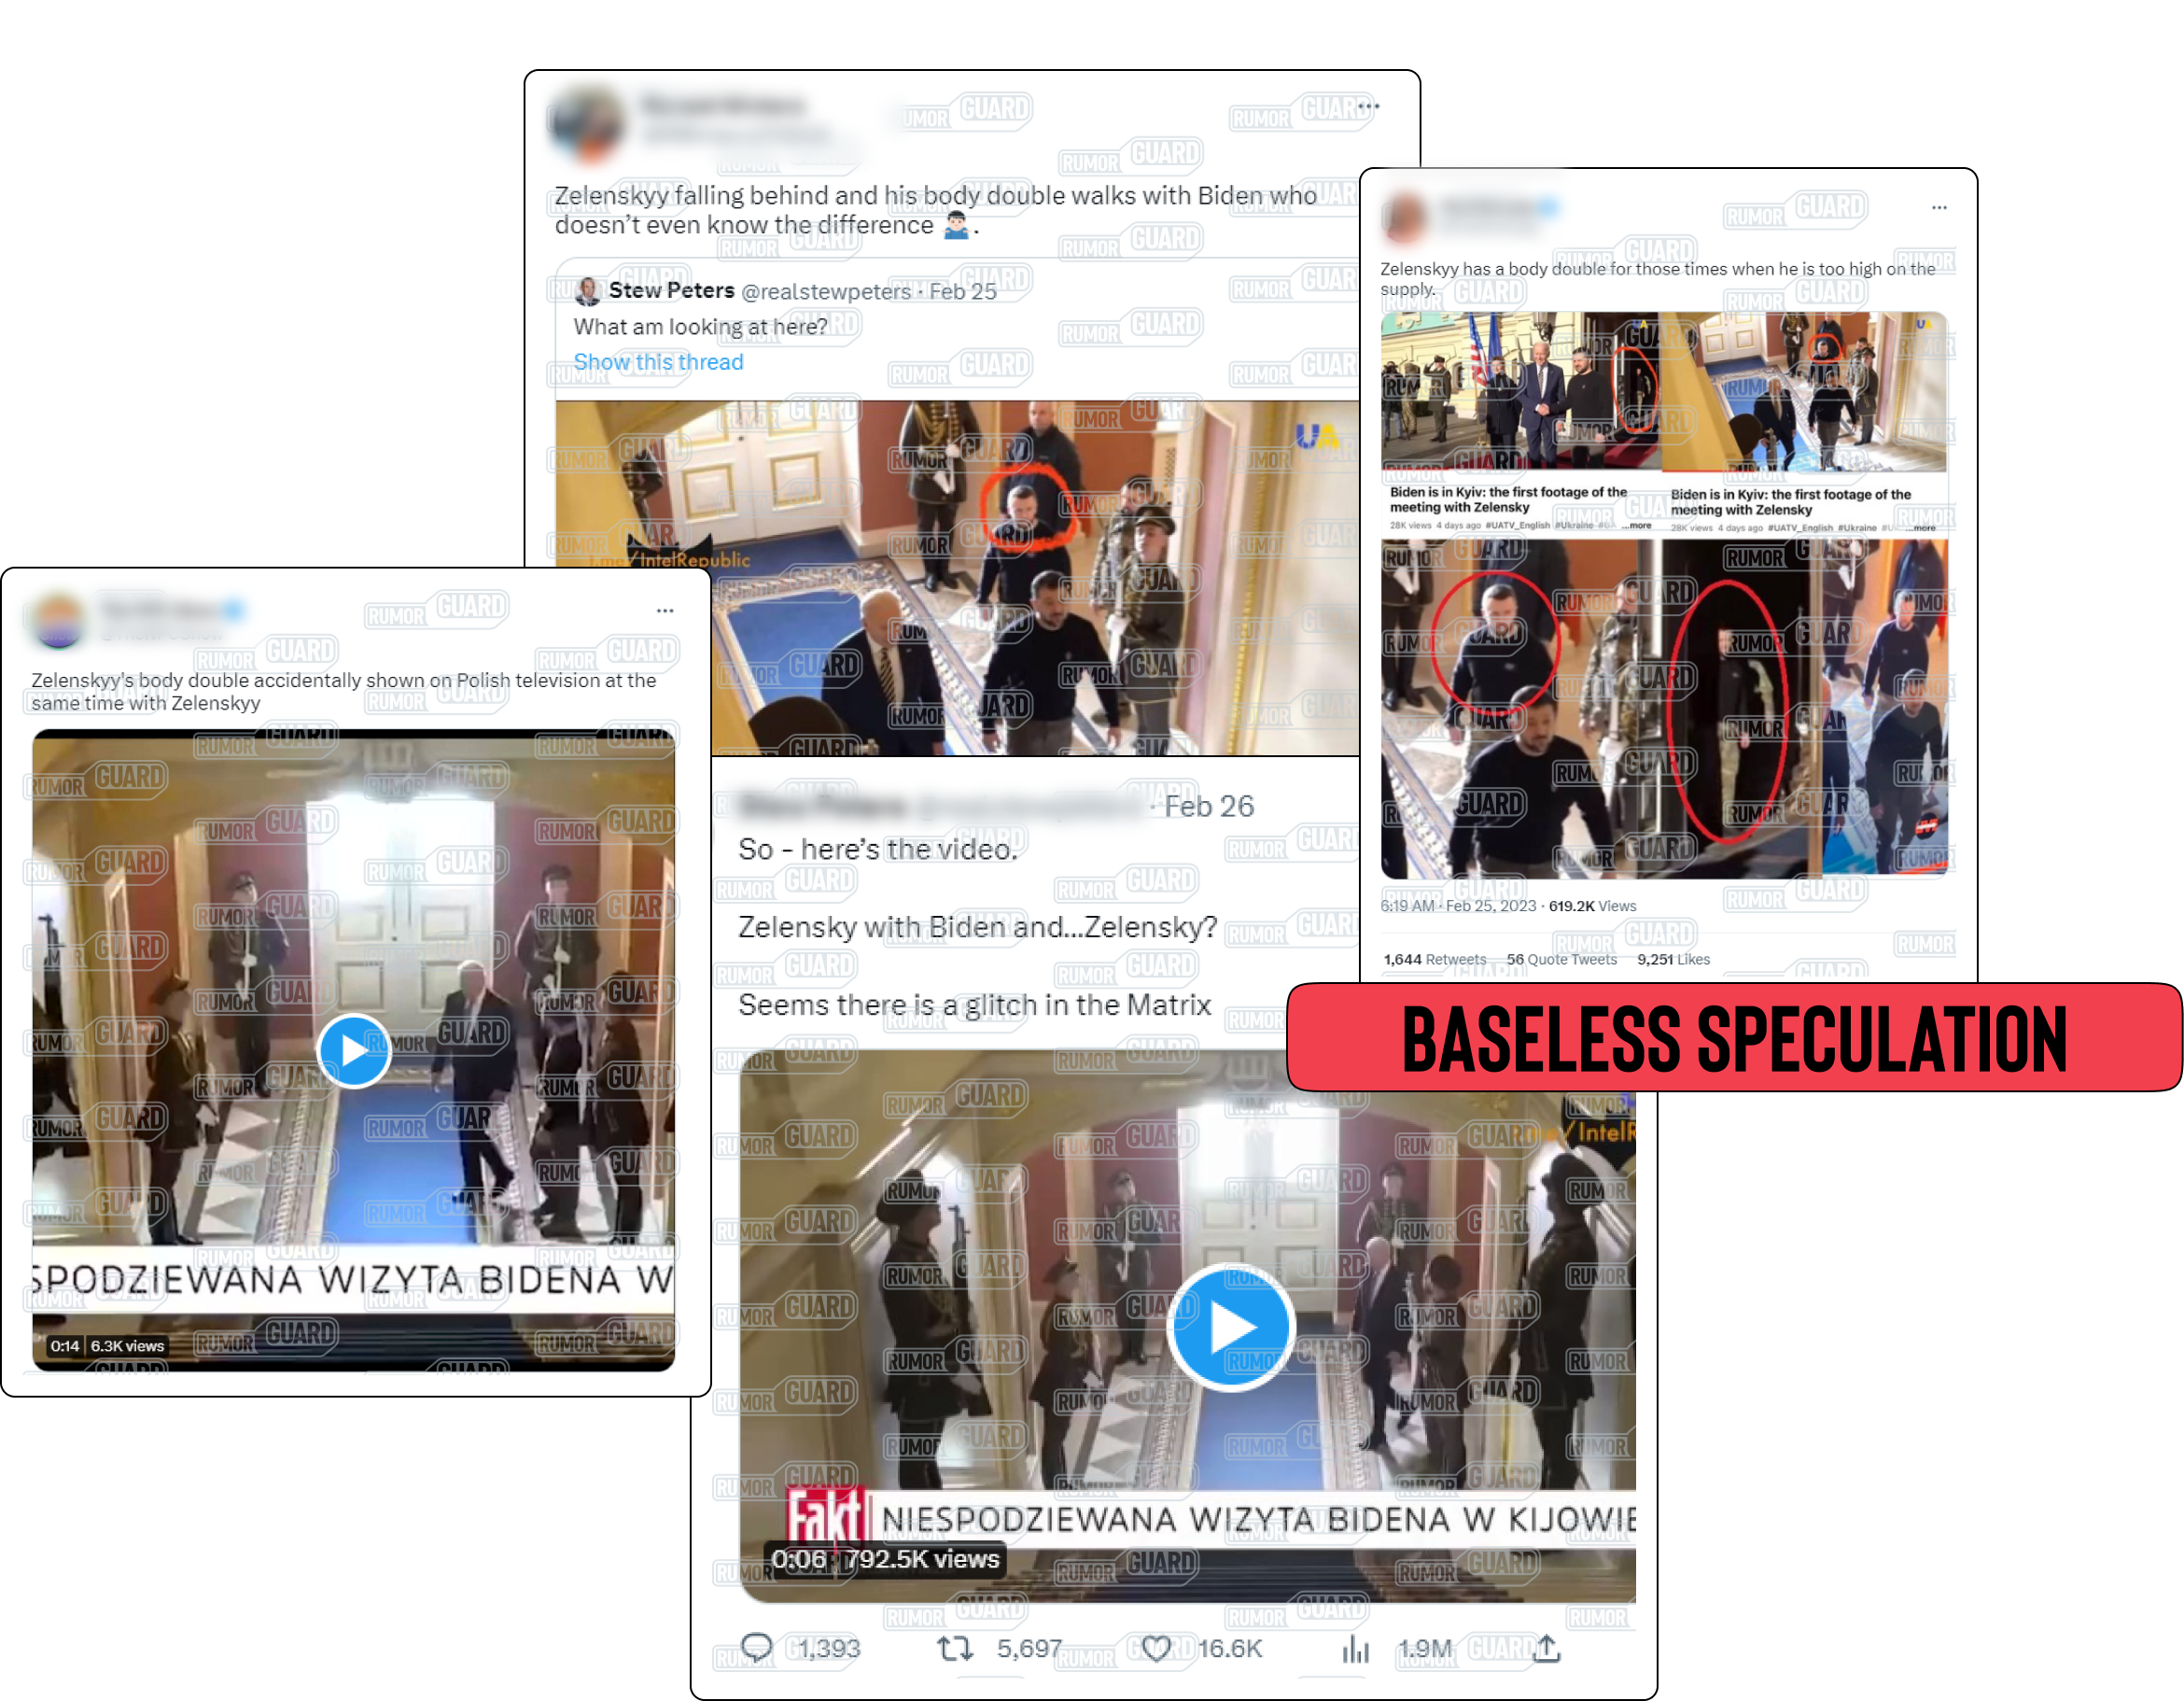 Four tweets feature pictures and videos from U.S. President Joe Biden’s February 2023 trip to Ukraine and conspiratorial messages claiming that Ukrainian President Volodymyr Zelenskyy was using a body double. One reads, “seems there’s a glitch in the Matrix”; another says Zelenskyy’s “body double walks with Biden who doesn’t even know the difference”; another claims the footage was “accidentally” aired on Polish TV; and the last accuses Zelenskyy of using drugs. The News Literacy Project has added a label that says, “BASELESS SPECULATION.”